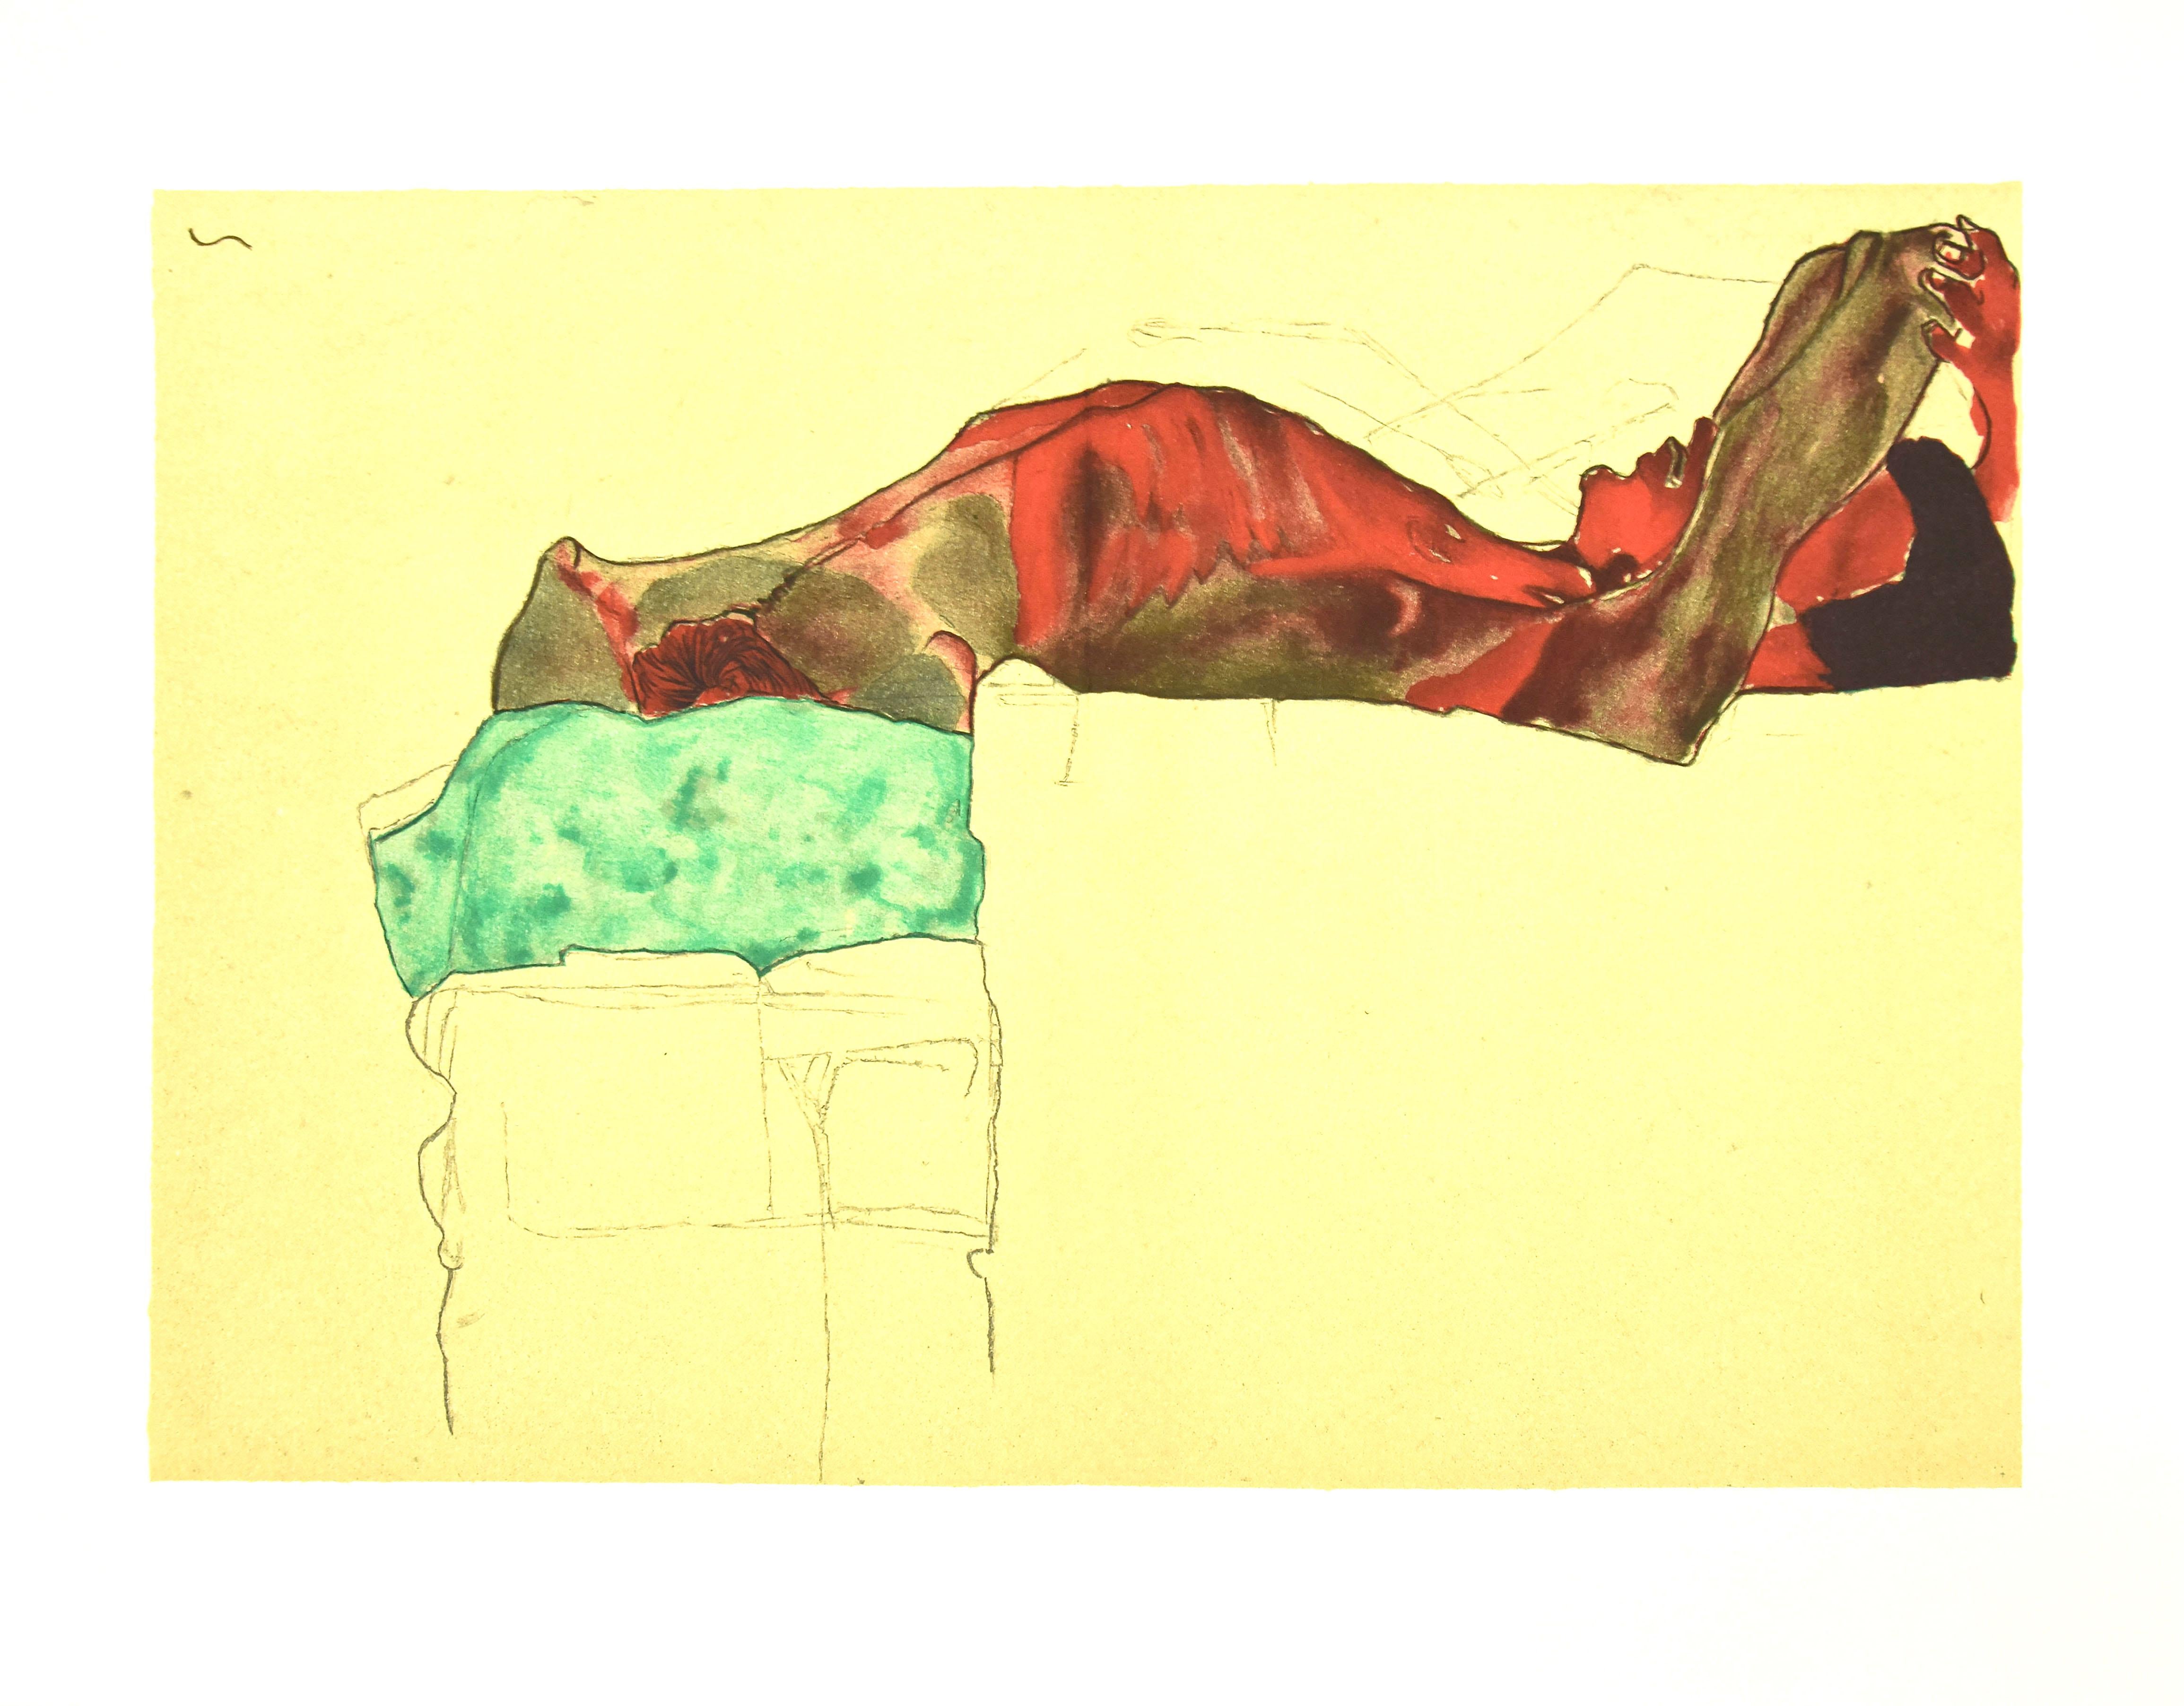 (after) Egon Schiele Nude Print - Reclining Male Nude with Green Cloth - Original Lithograph after E. Schiele